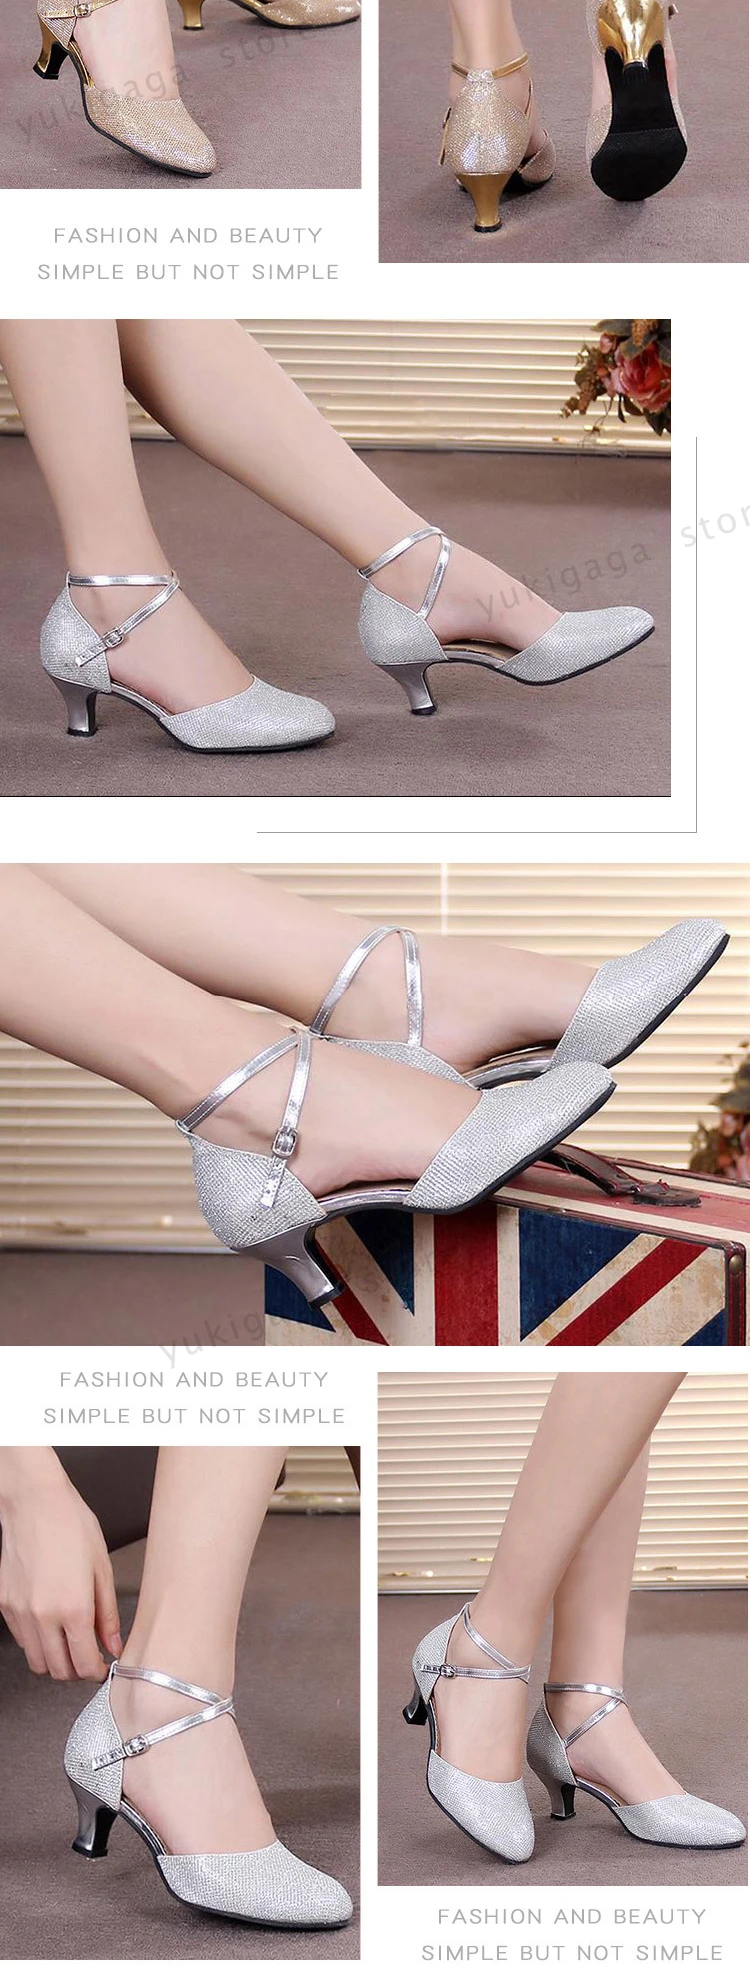 New Latin Dance Shoes for Women/Ladies/Girls/5 Colors/Tango Pole Ballroom Dancing Shoes Heeled 3.5CM And 5CM